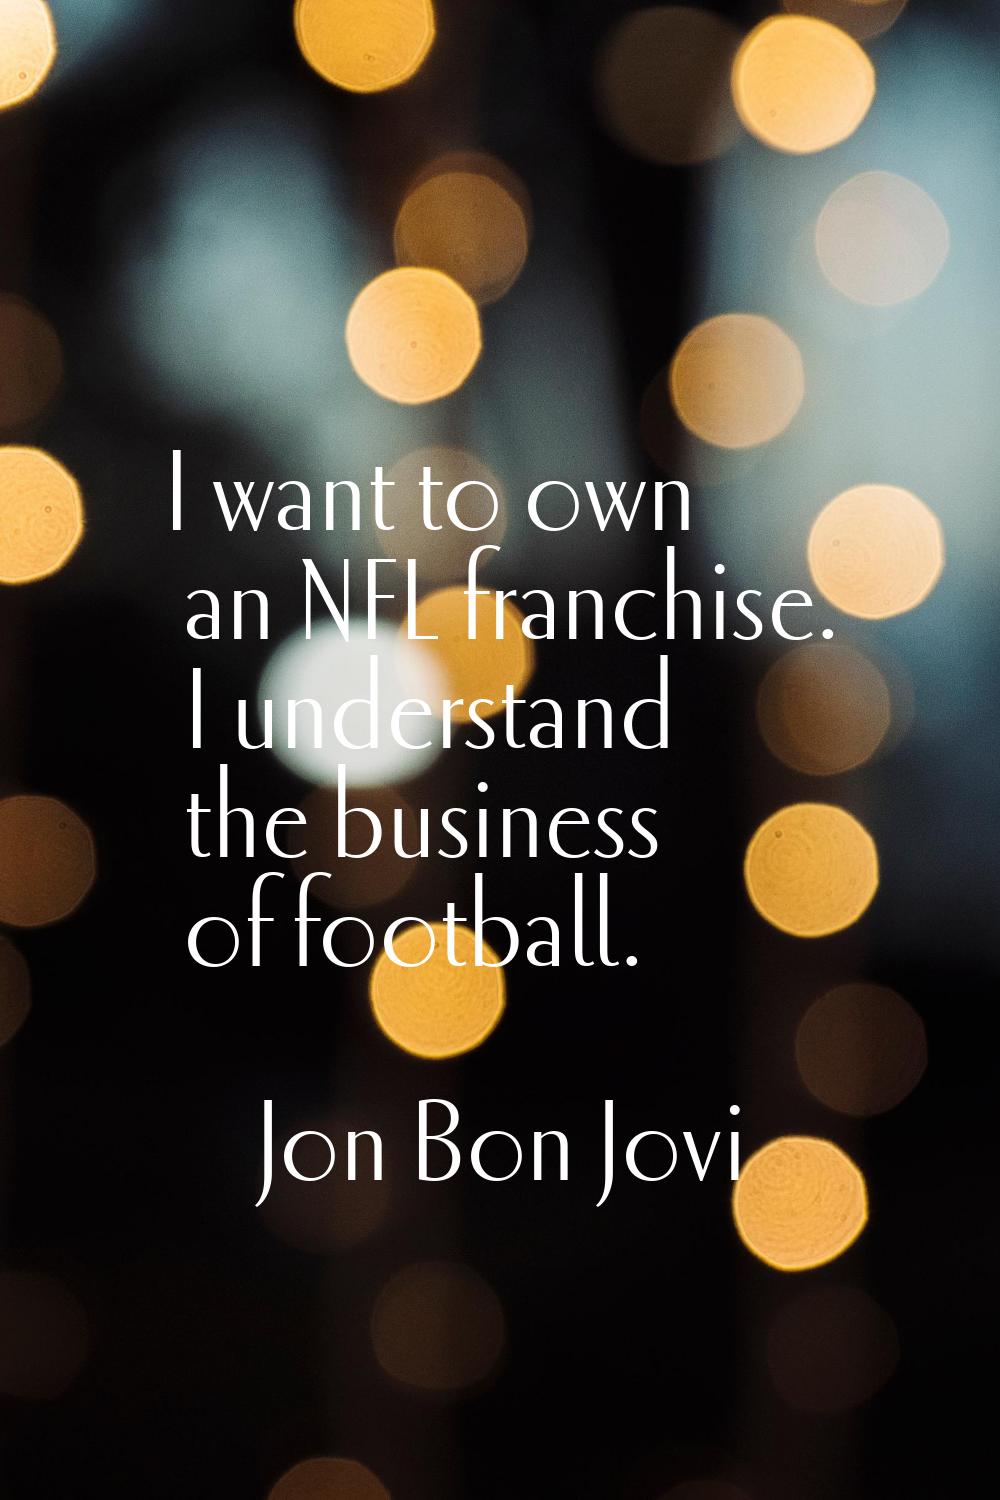 I want to own an NFL franchise. I understand the business of football.